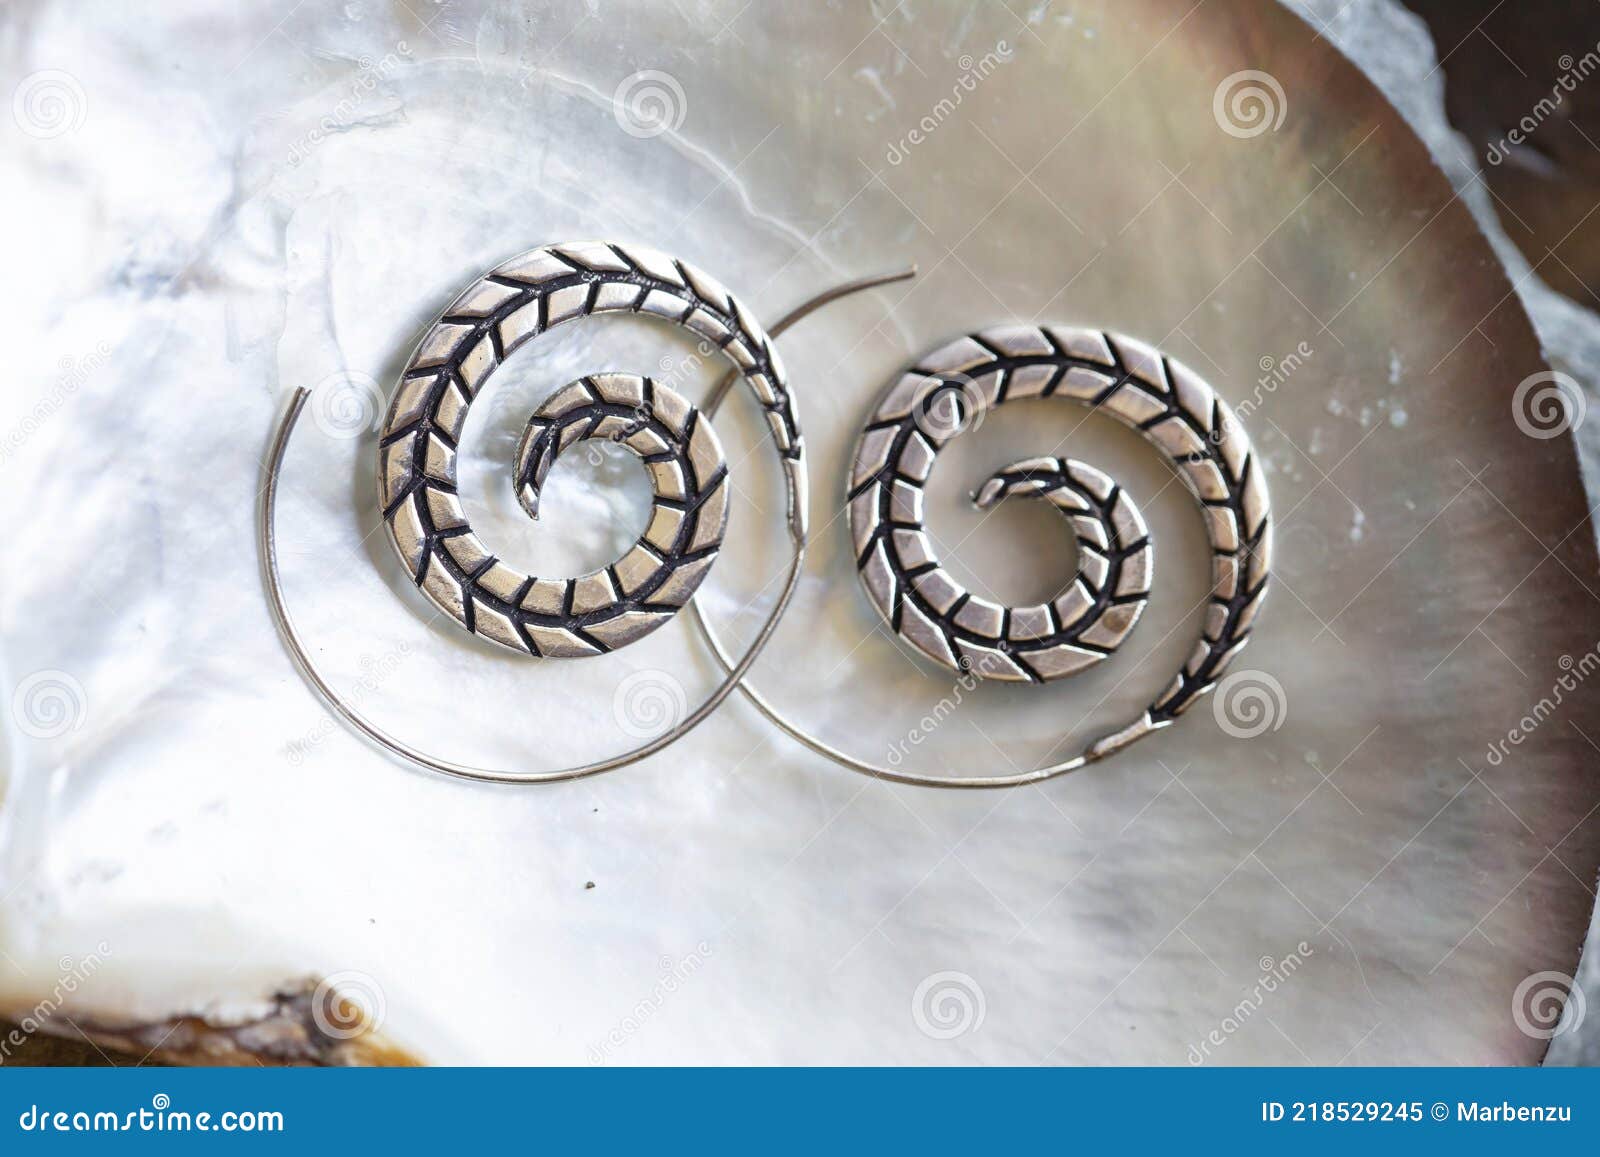 metal decorative oriental spirale  earrings on natural neutral background